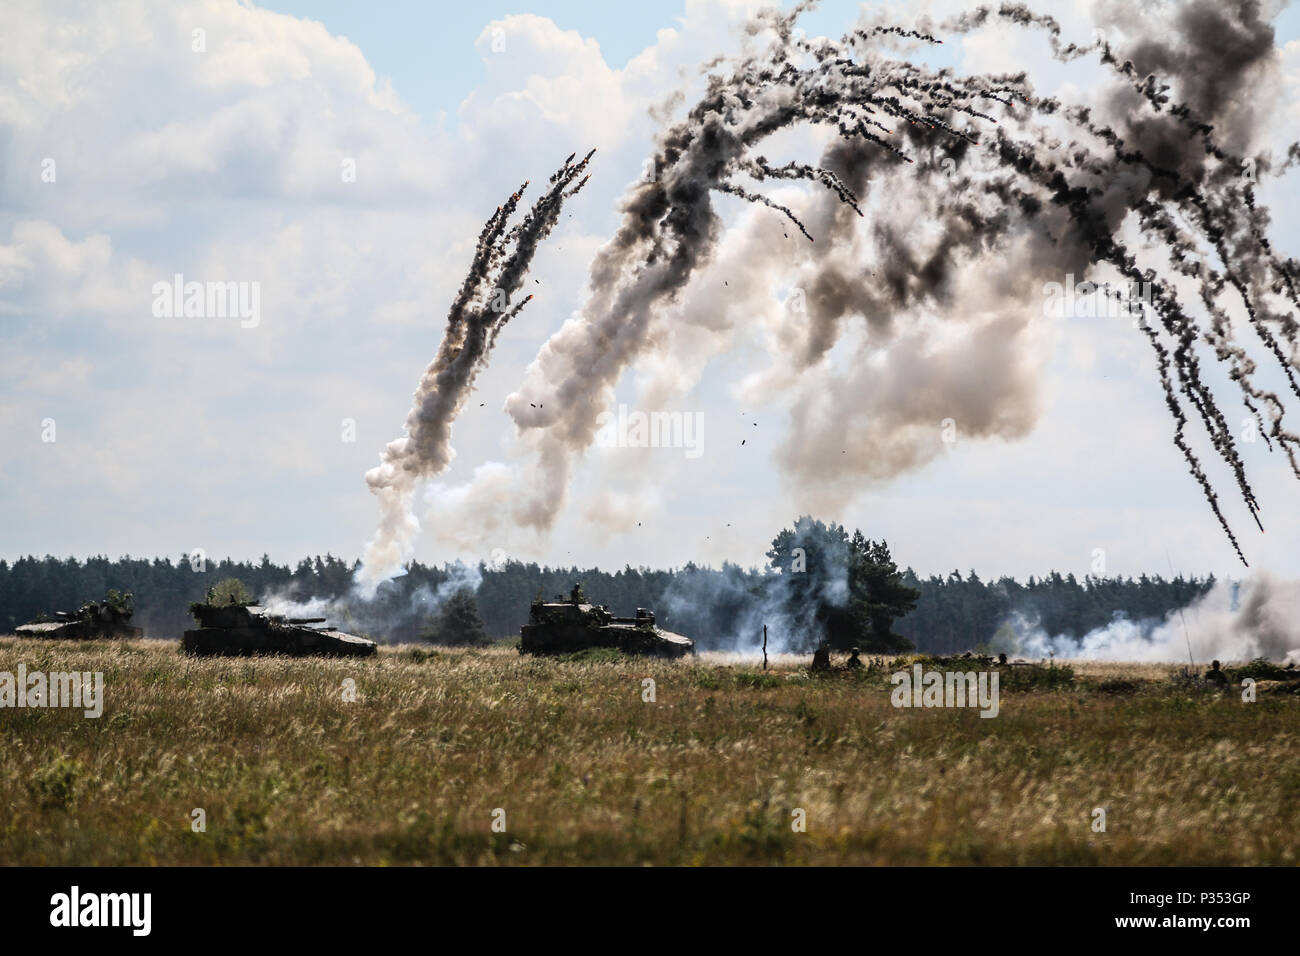 Polish army Rak 120mm Self-Propelled Mortar Systems with 15th Mechanized Brigade, fire for effect during a lethality demonstration for exercise Puma 2 with Battle Group Poland at Bemowo Piskie Training Area, Poland on June 15, 2018 as part of Saber Strike 18. This year's exercise, which runs from June 3-15, tests allies and partners from 19 countries on their ability work together to deter aggression in the region and improve each unit's ability to perform their designated mission. (U.S. Army photo by Spc. Hubert D. Delany III /22nd Mobile Public Affairs Detachment) Stock Photo